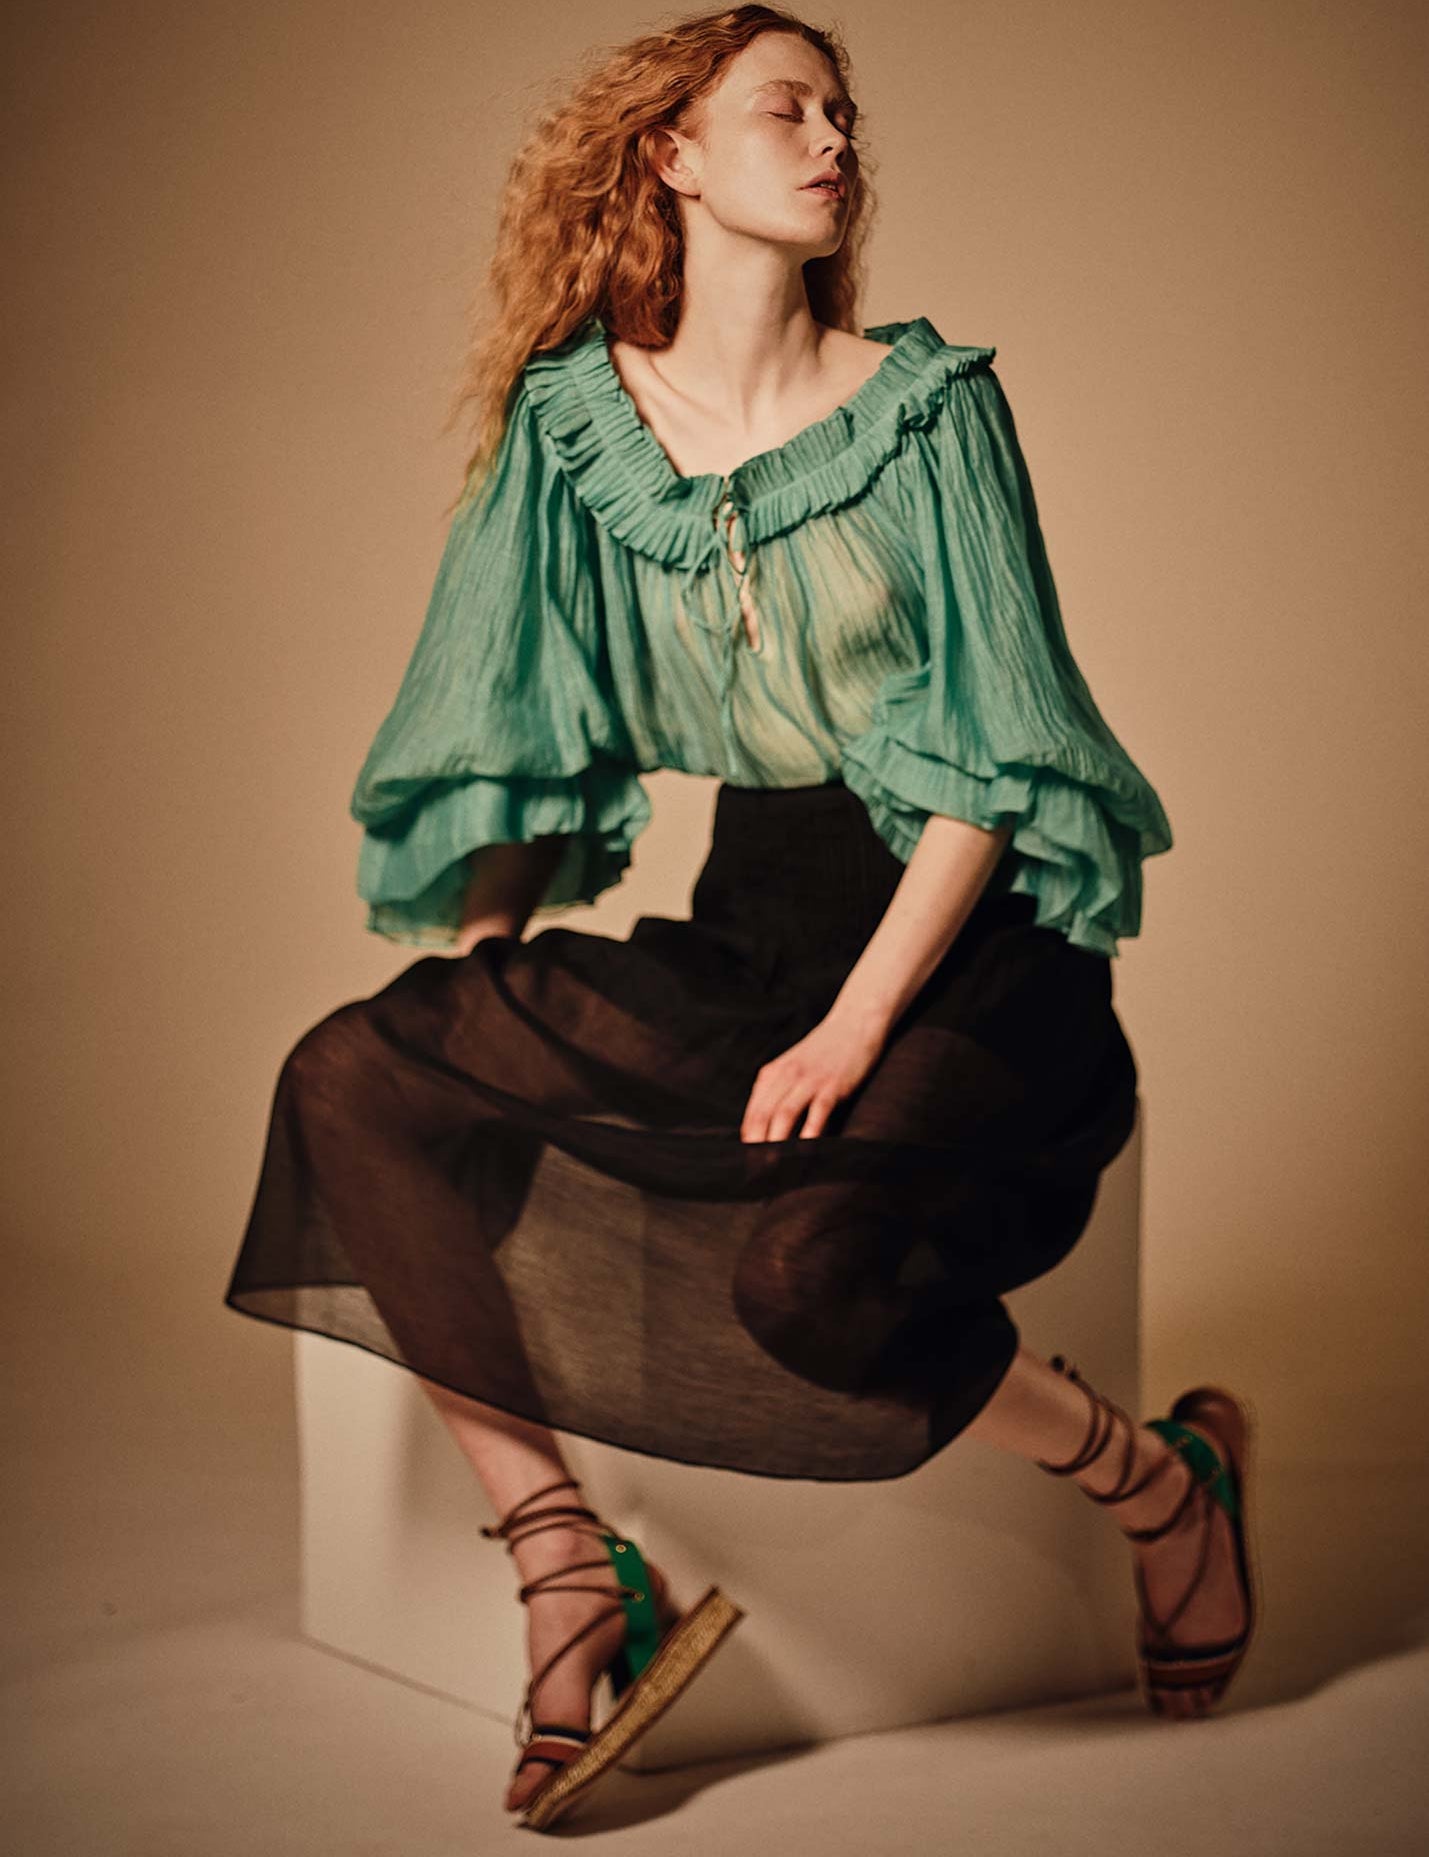 Front view of Roussia Veridian Green Blouse by Thierry Colson photographed by Stéphane Gautronneau